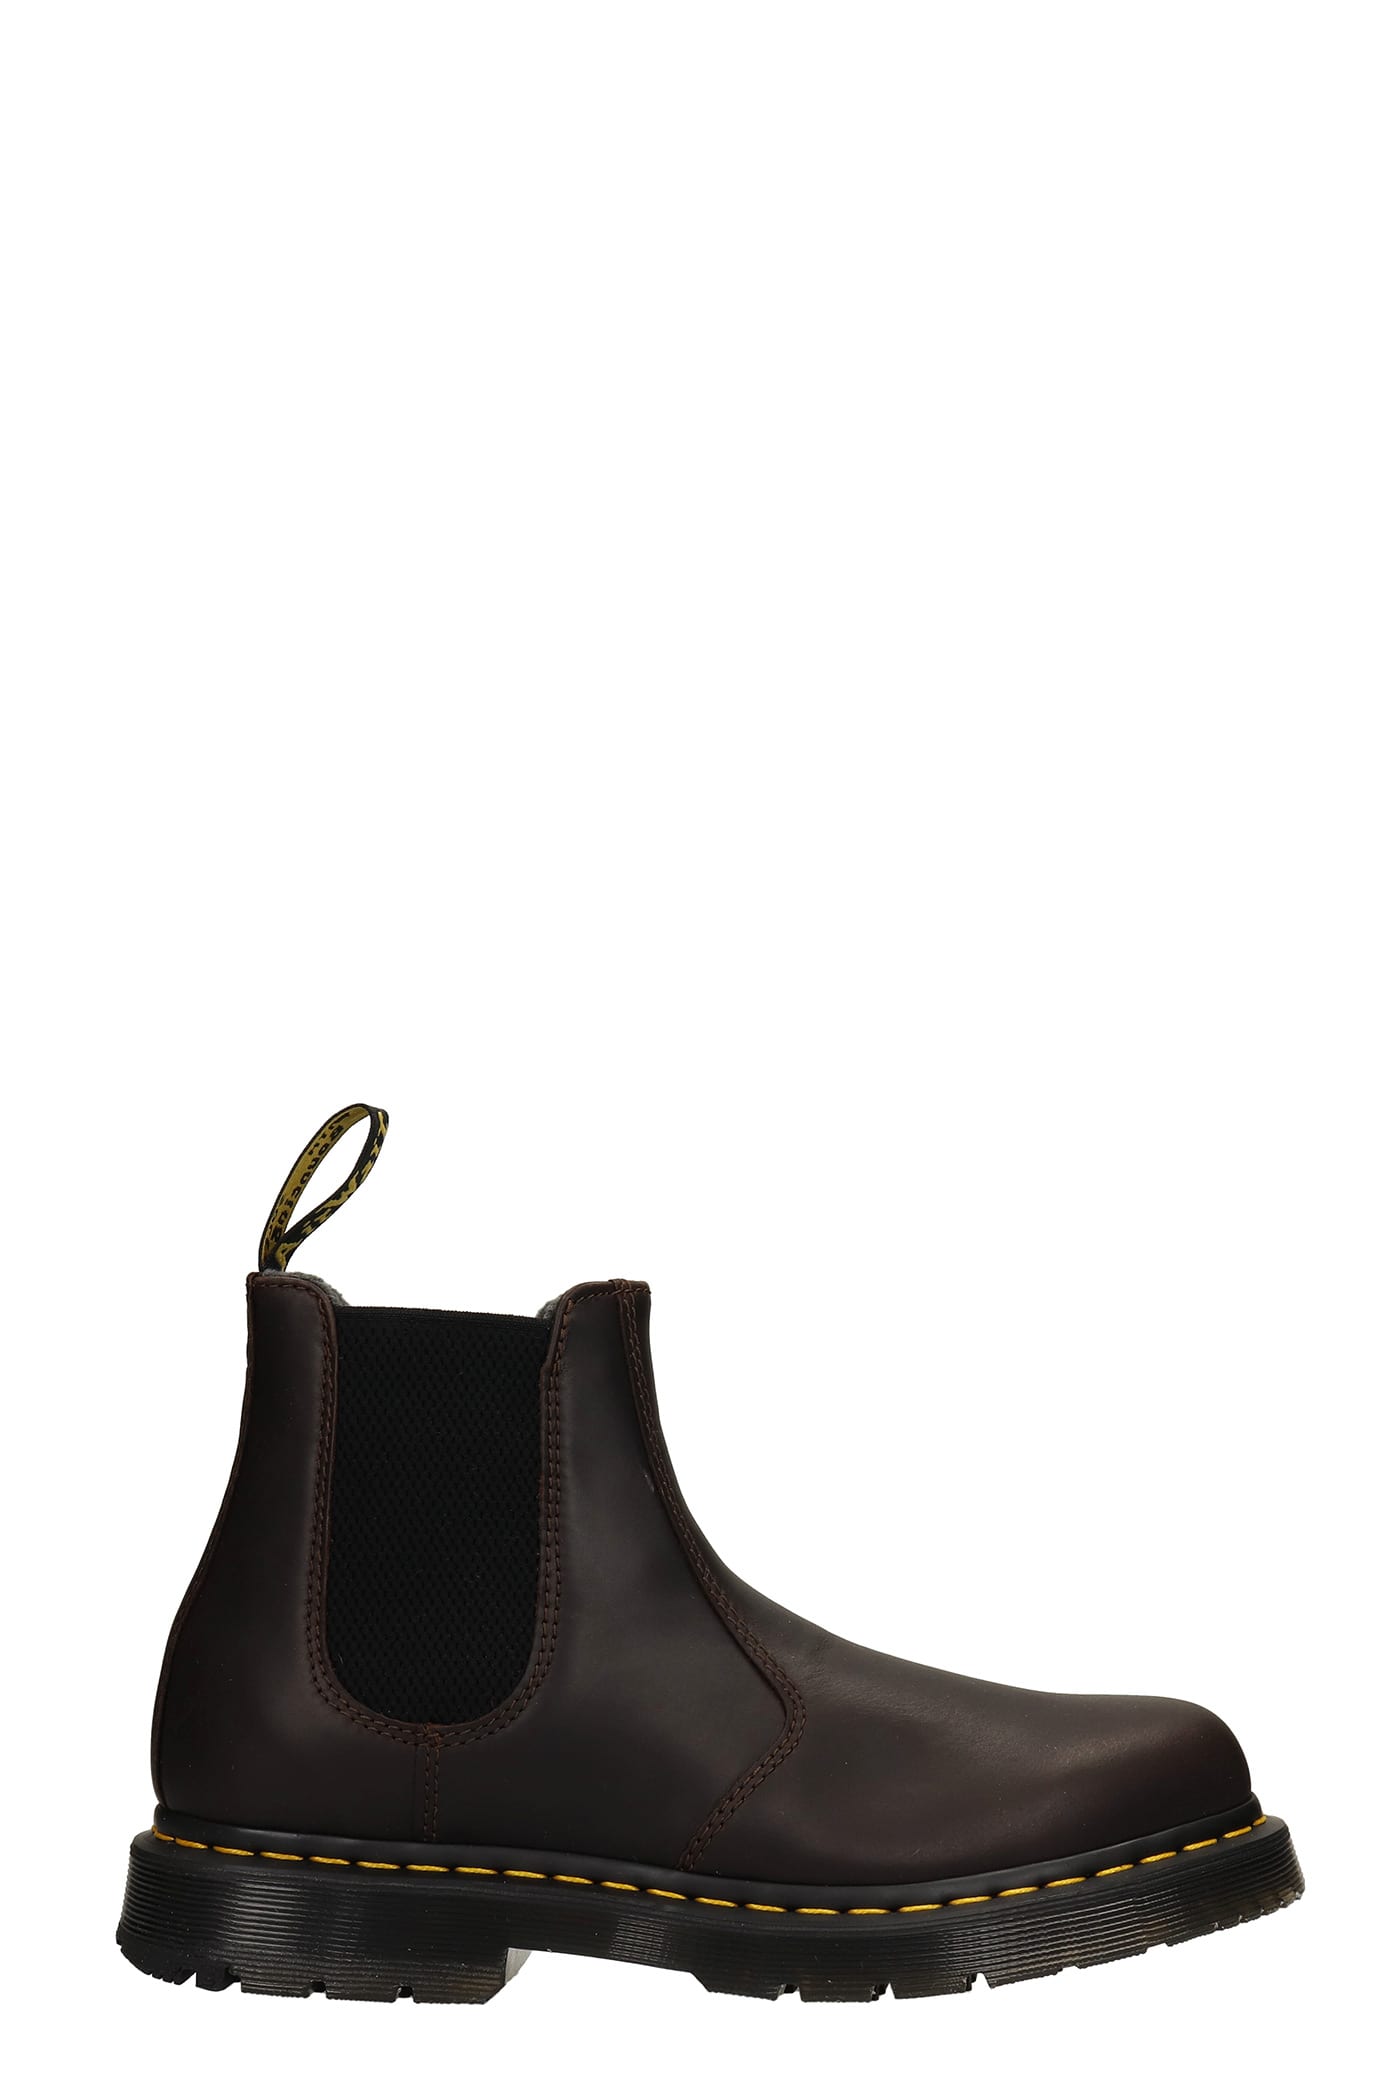 Dr. Martens 2976 Cocoa Combat Boots In Dark Brown Leather